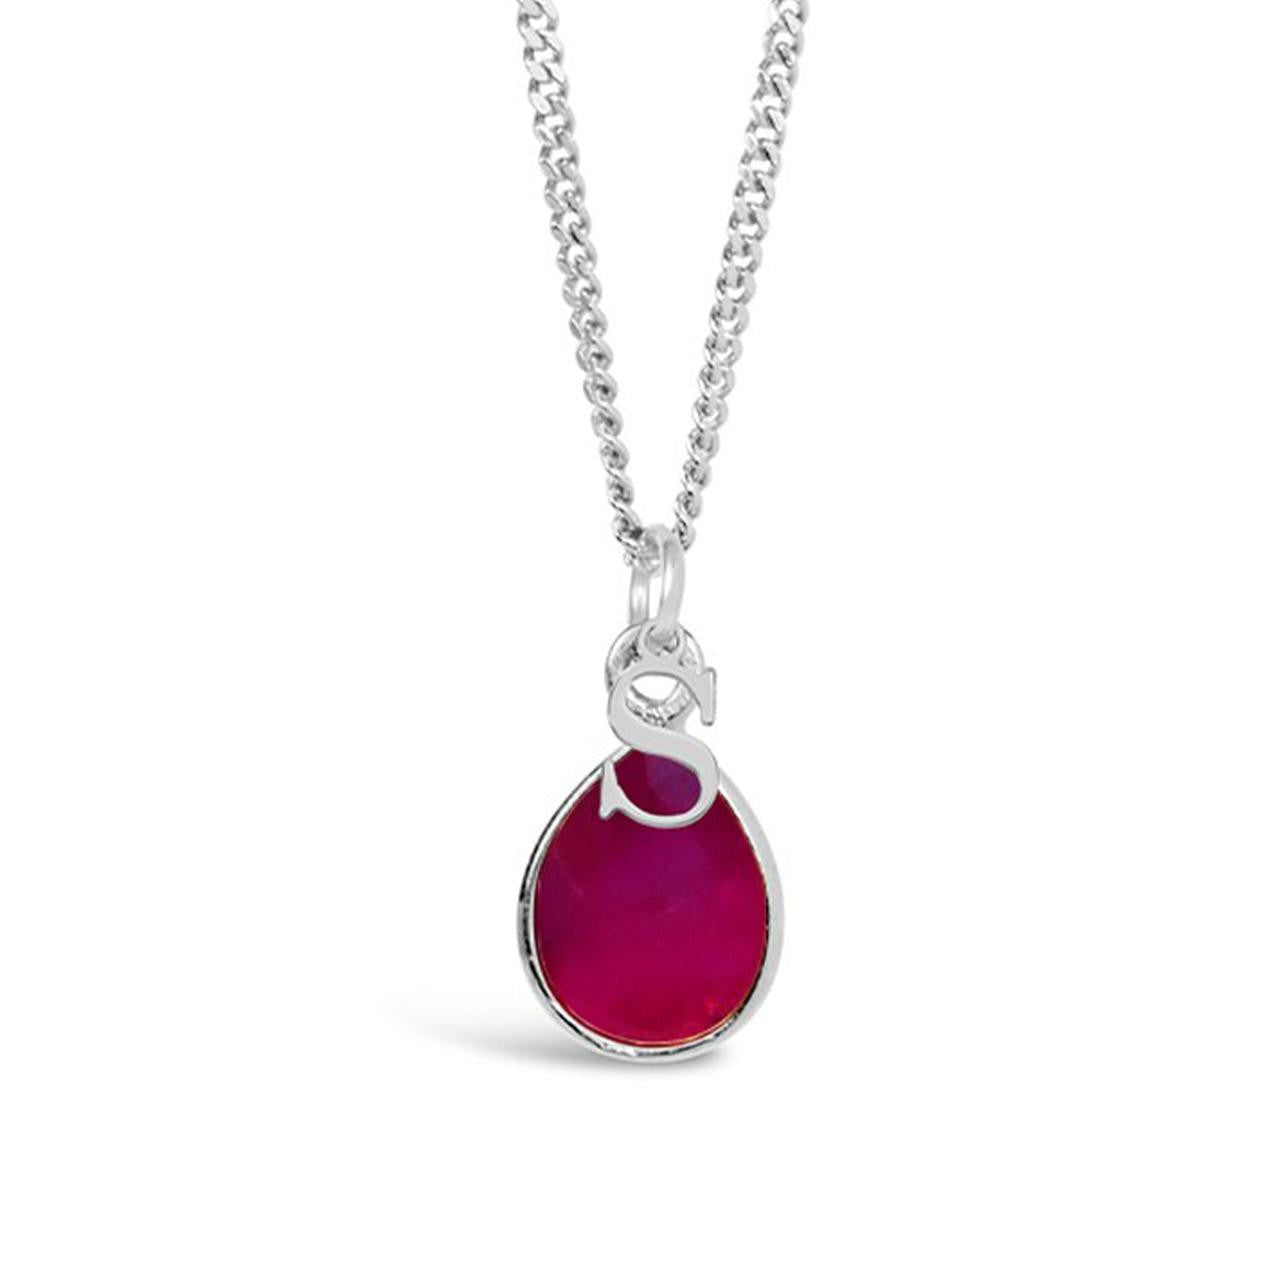 ruby charm necklace in silver with initial charm on a white background